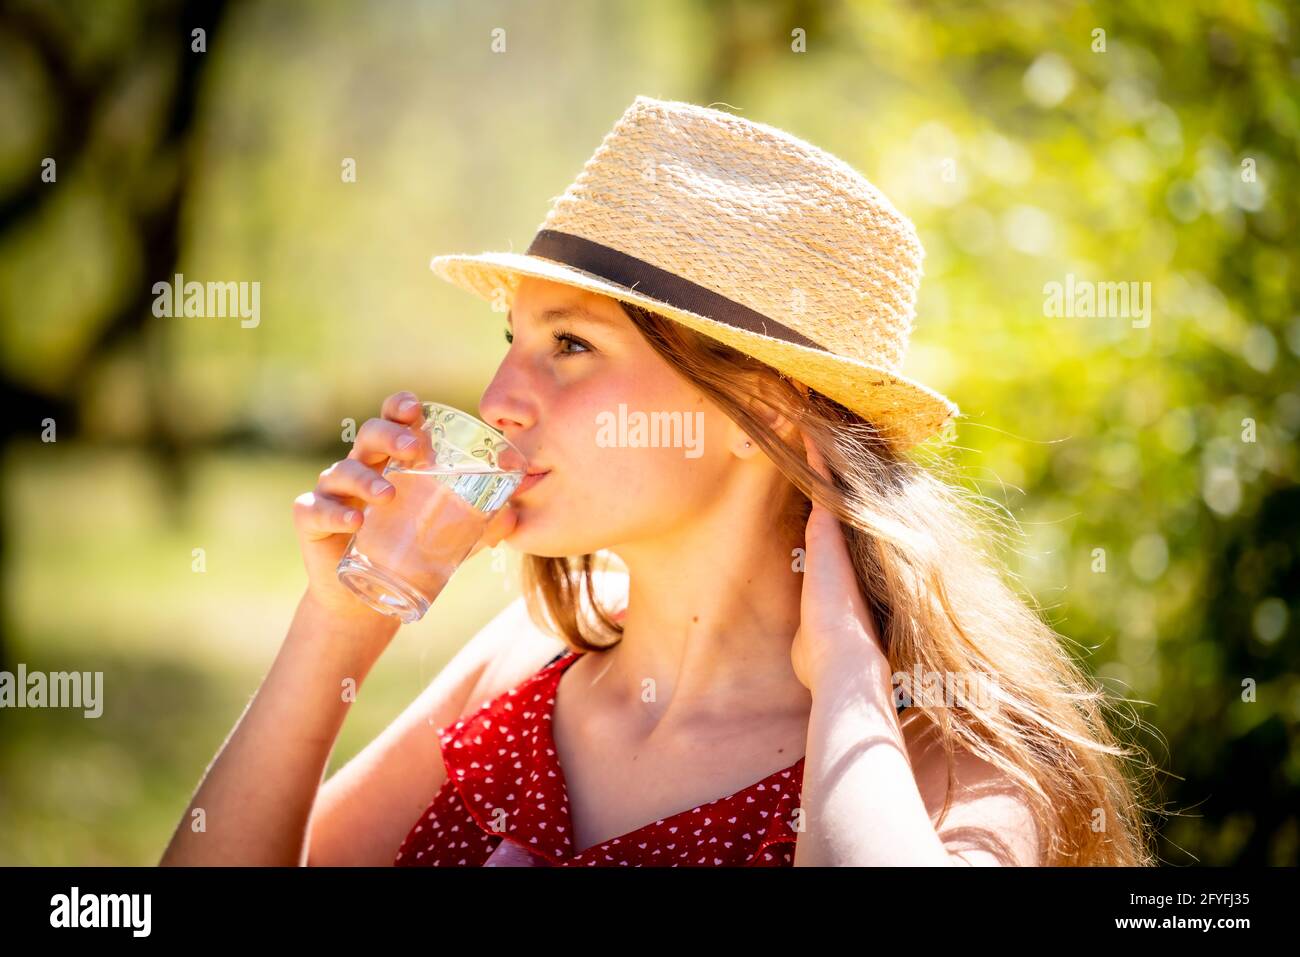 Woman drinking of glass of water. Stock Photo